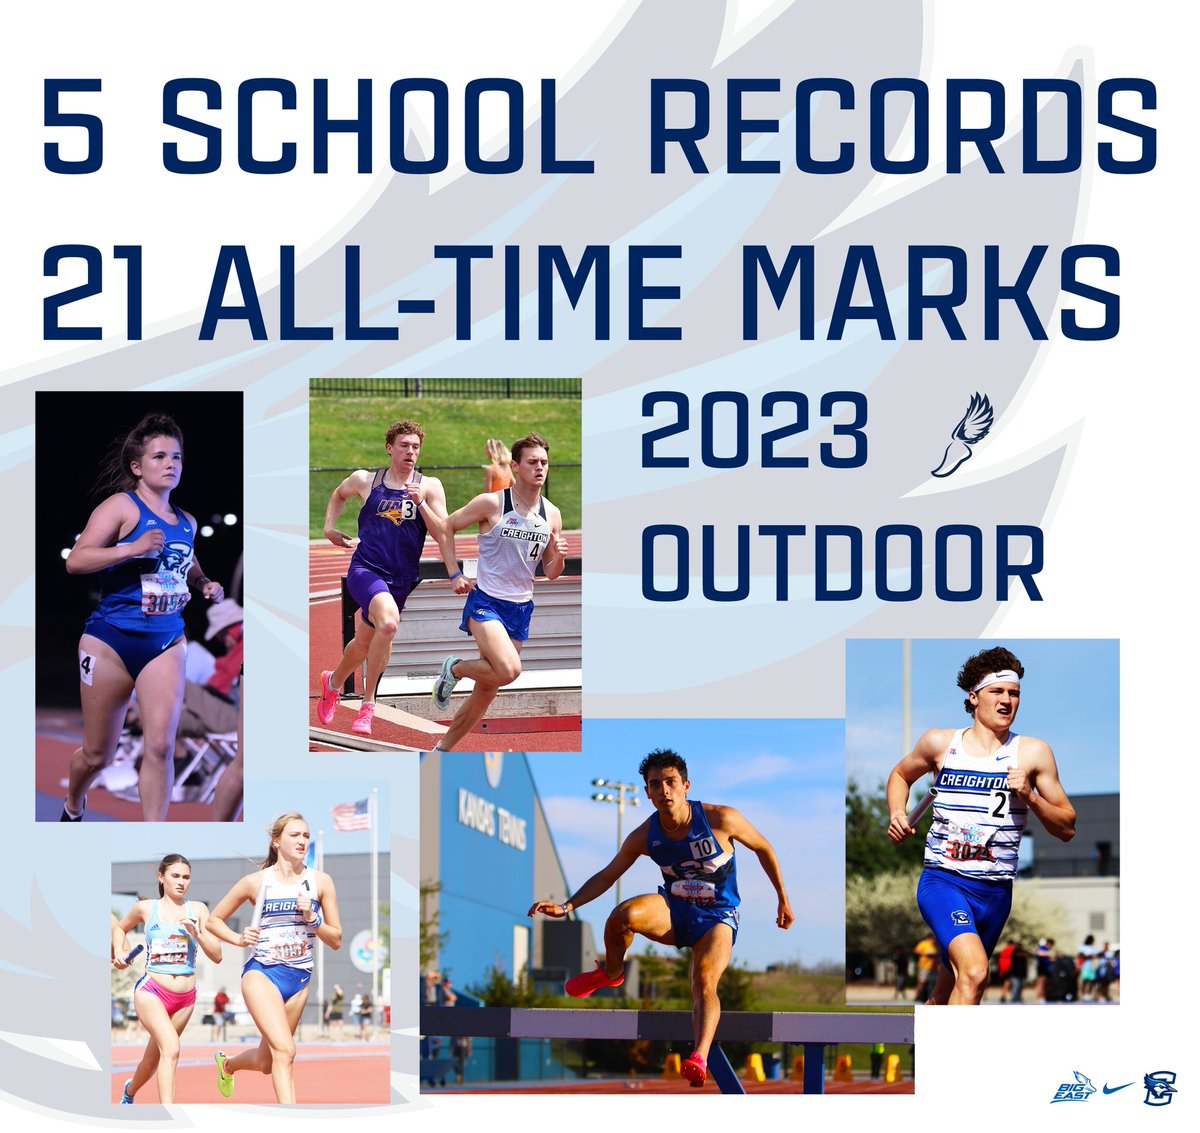 More history written ✍️

What a spring! 🏃‍♀️🏃
The five school records and twenty-one all-time marks, pushes the indoor, outdoor & xc total to 32 school records and 220 all-time marks since 2018.

#EyesUp #FutureIsBright 
#GoJays